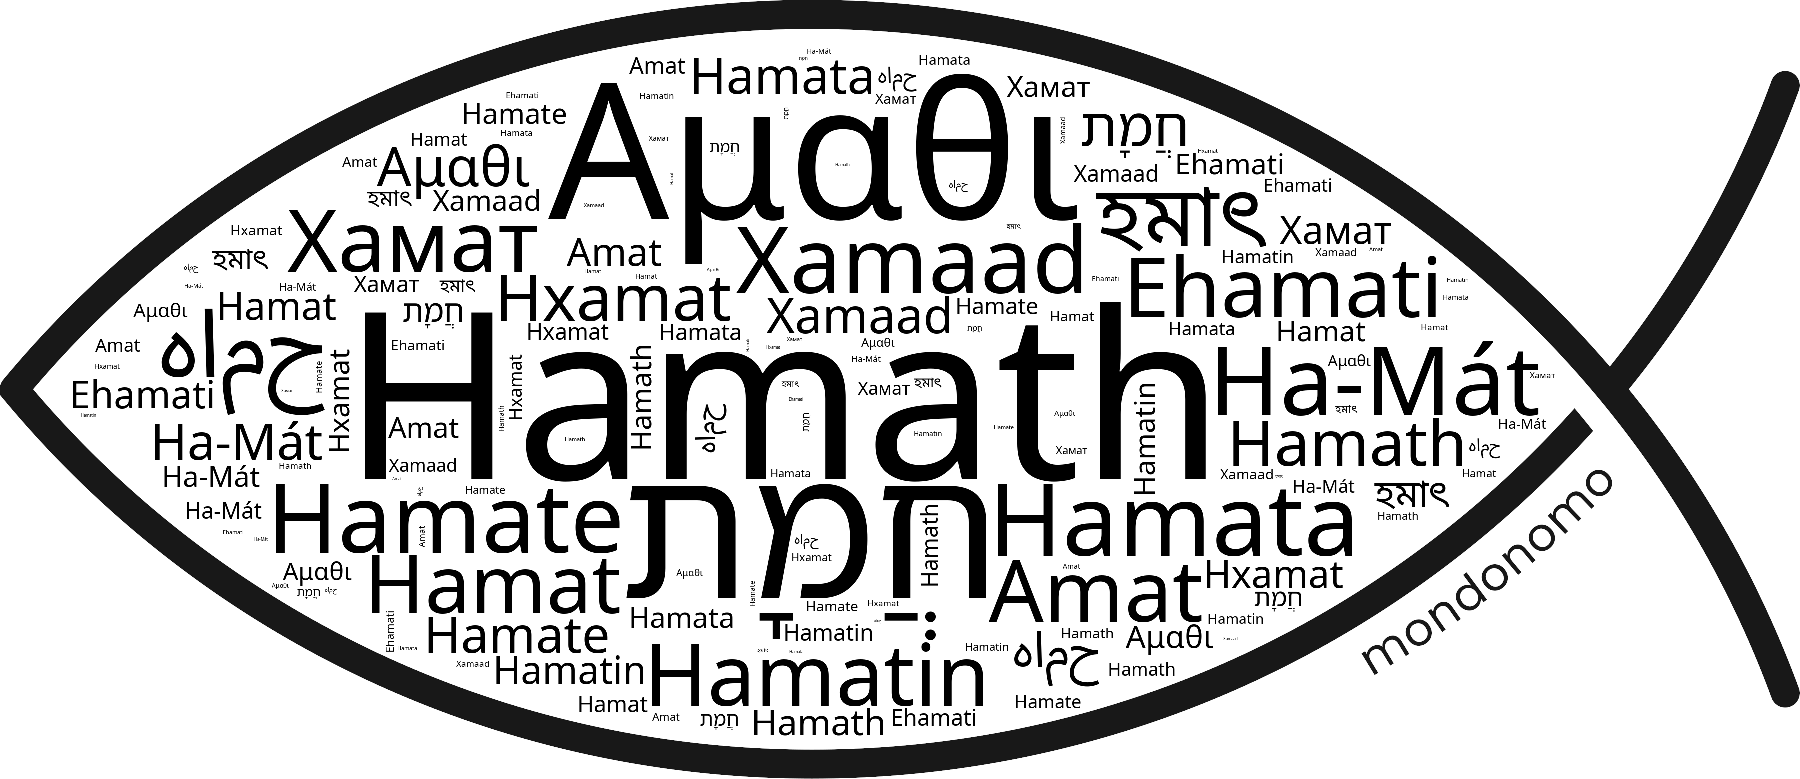 Name Hamath in the world's Bibles